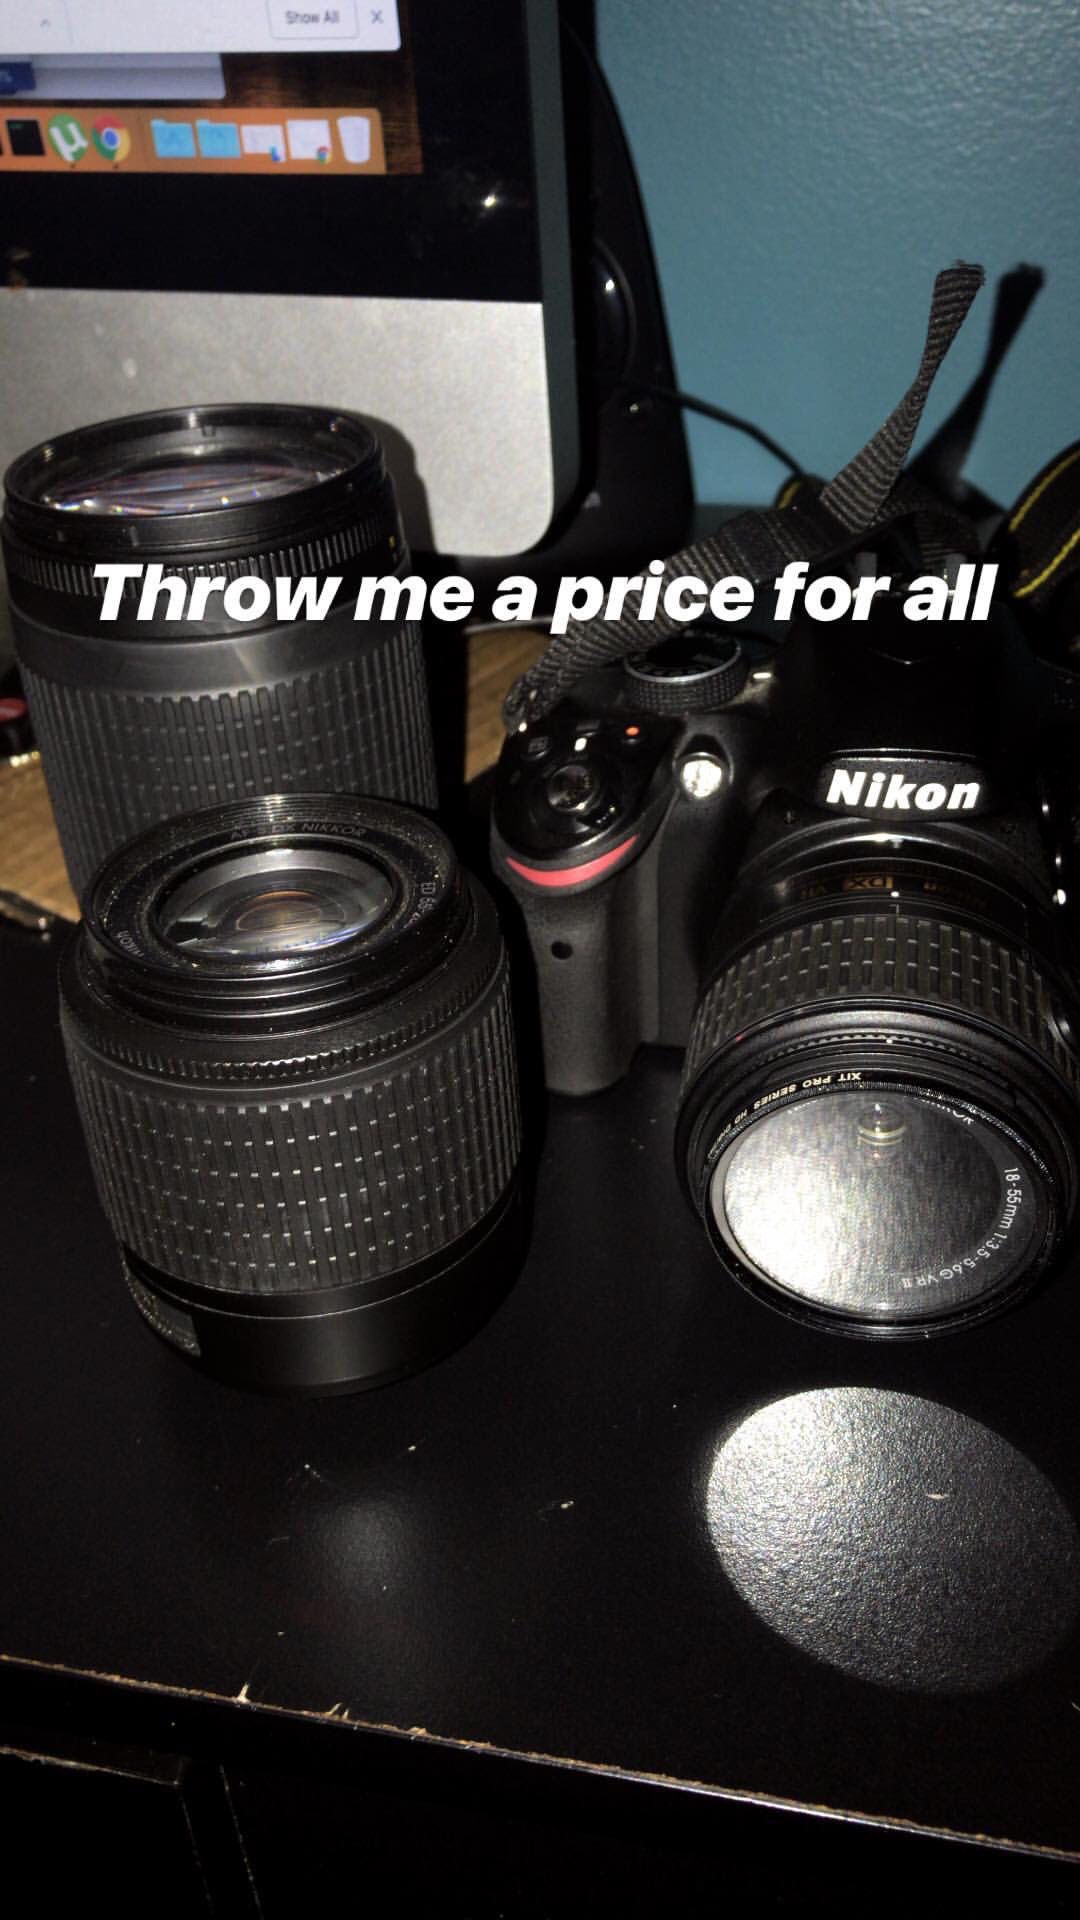 Nikon d3200 with lenses and charger/battery